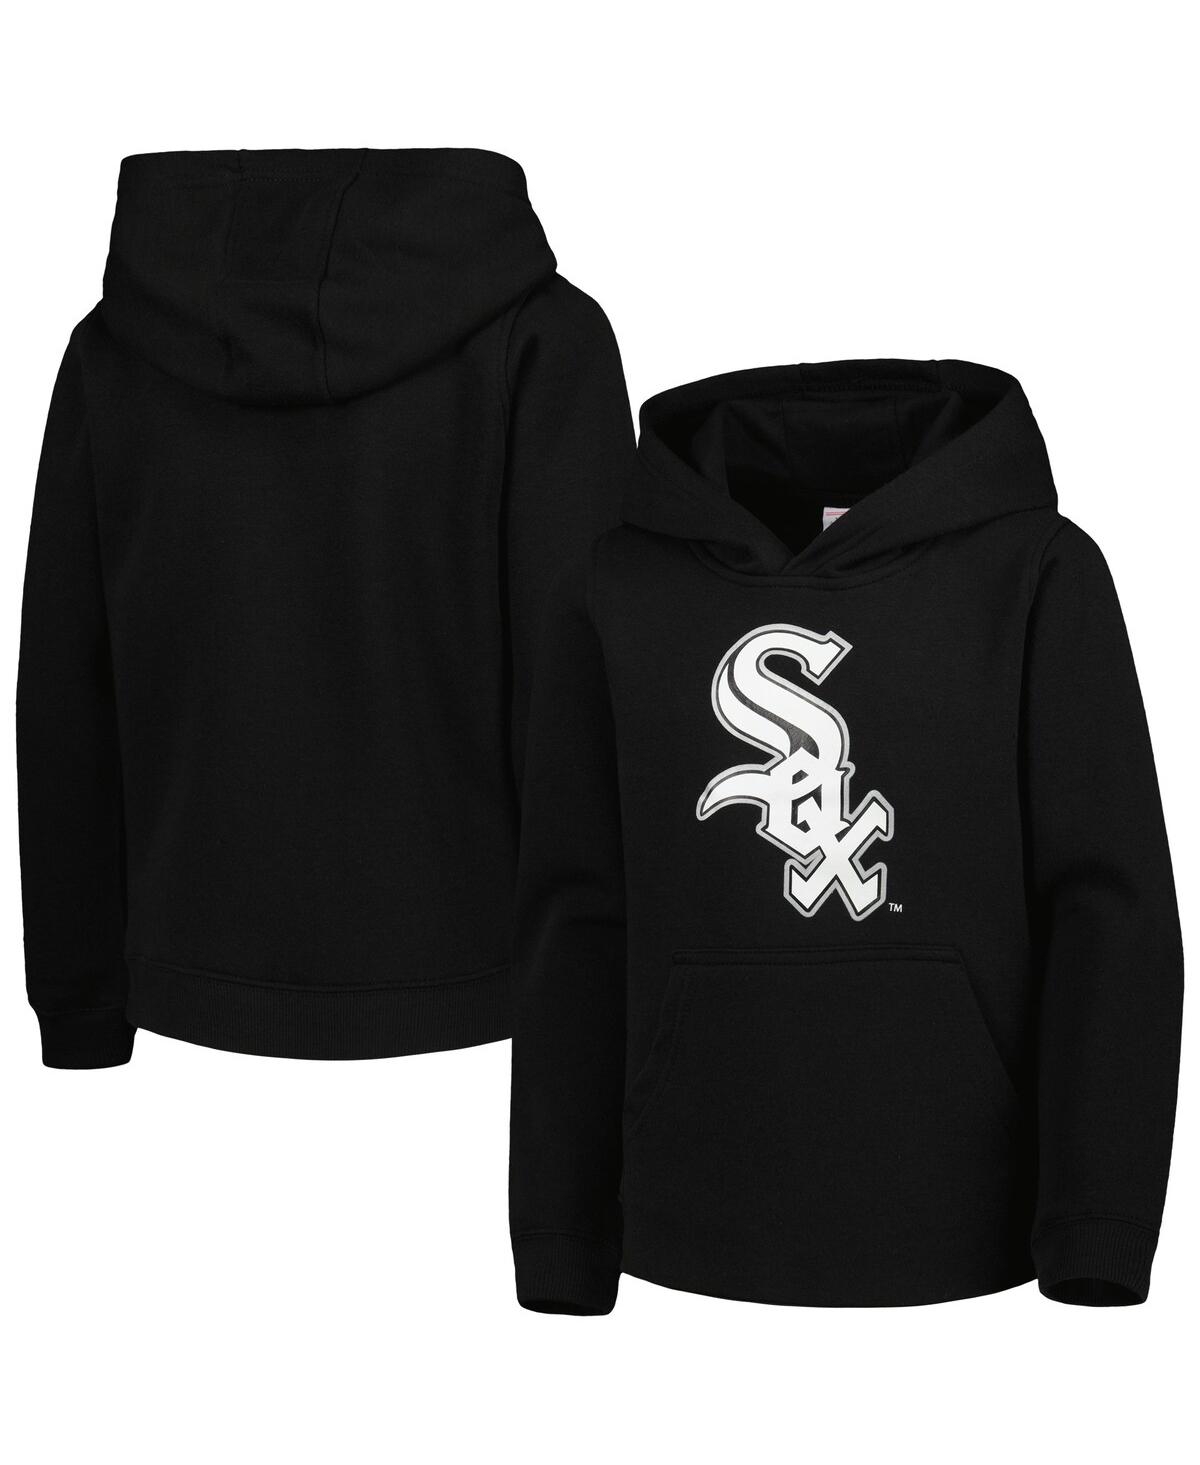 Outerstuff Kids' Big Boys And Girls Black Chicago White Sox Team Primary Logo Pullover Hoodie